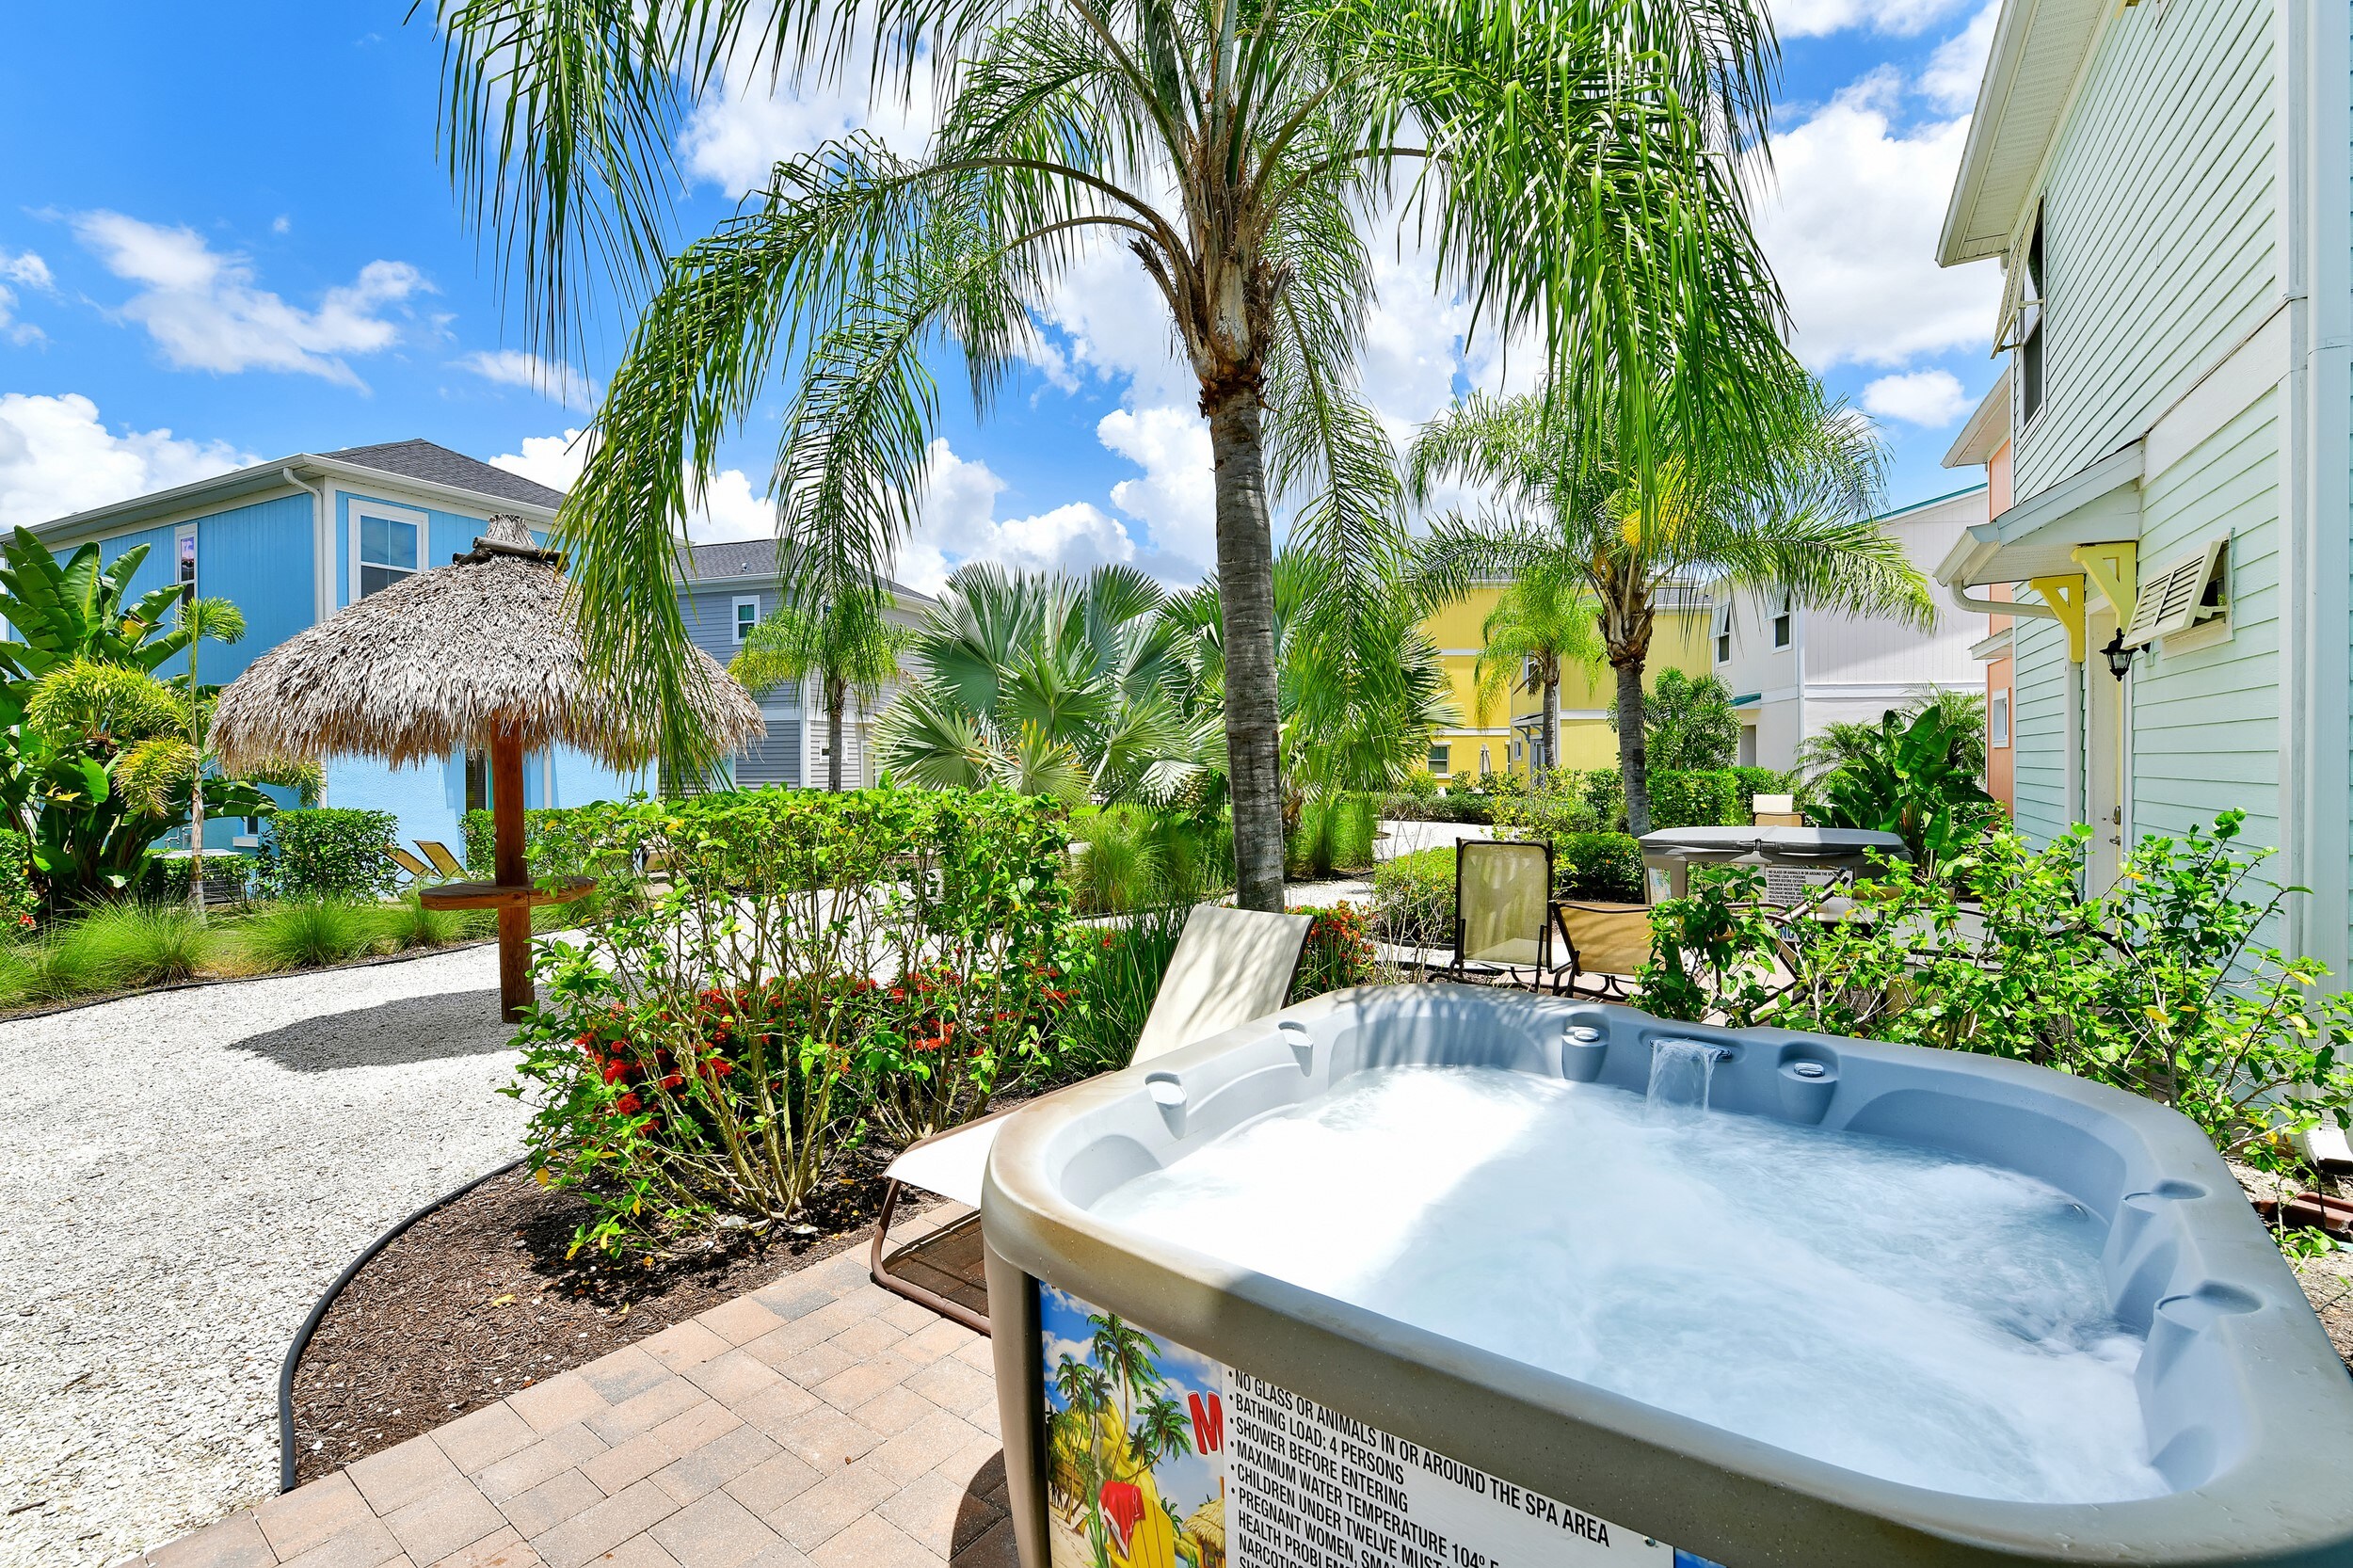 Property Image 2 - Ocean Blue Cottage near Disney with Private Hot Tub & Margaritaville Resort Access - 3012SR